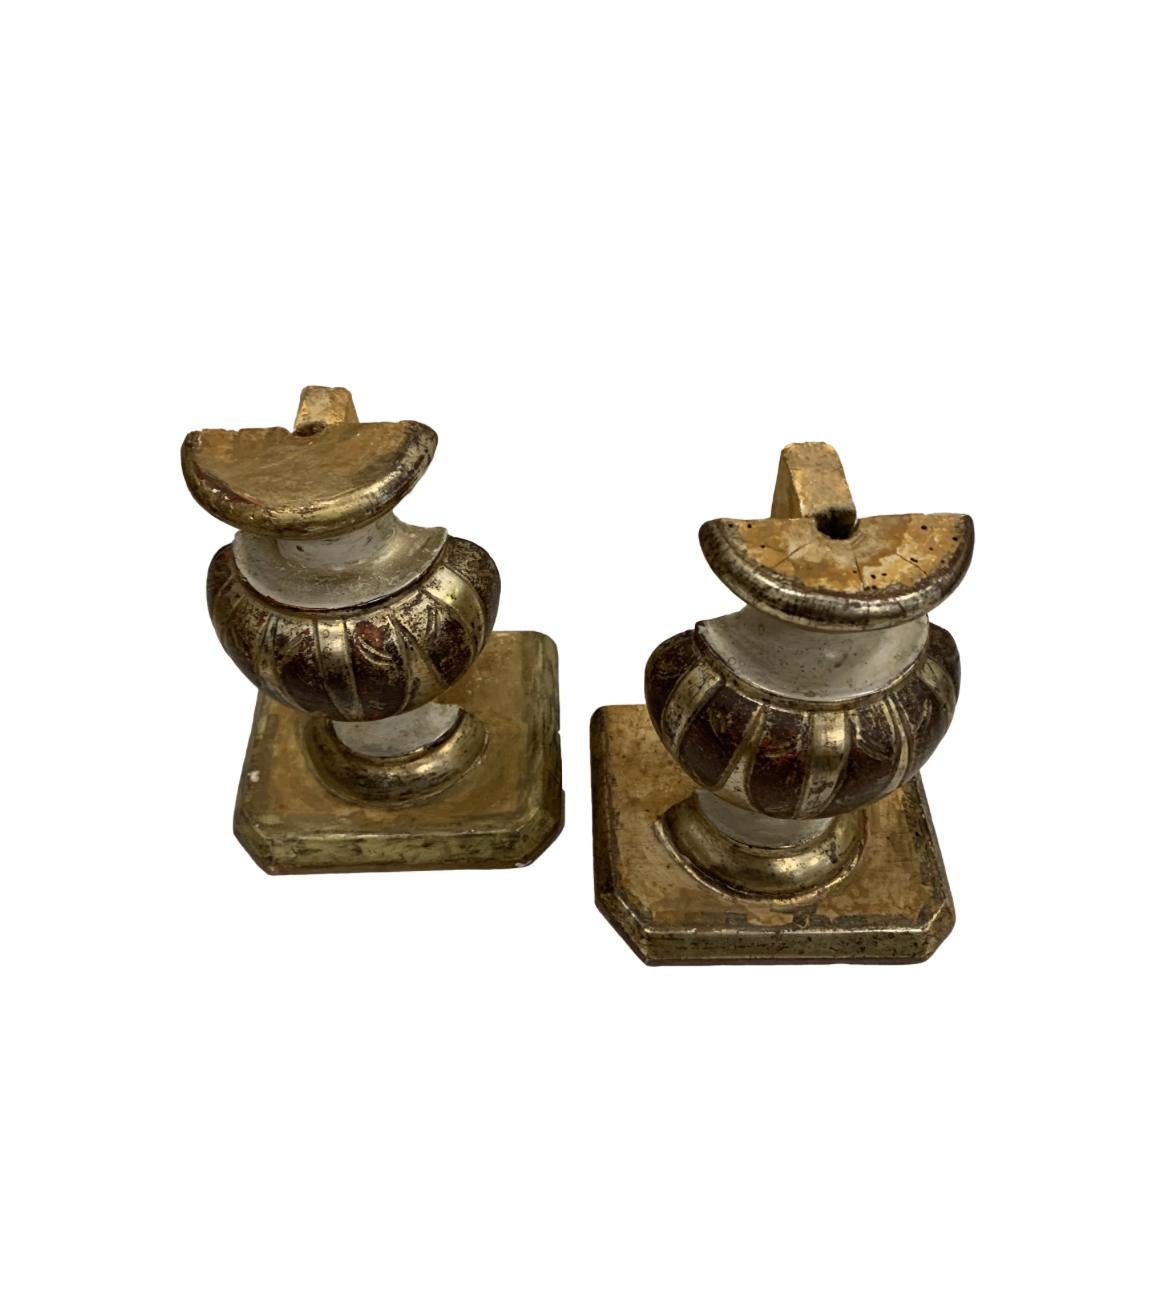 Here is a unique pair of 18th Century urn fragments in original paint and gilt. These feature a range of colors that add just a small pop of hue to any space. These fragments would make a great asset in a bookcase, library, a top a mantel or on a